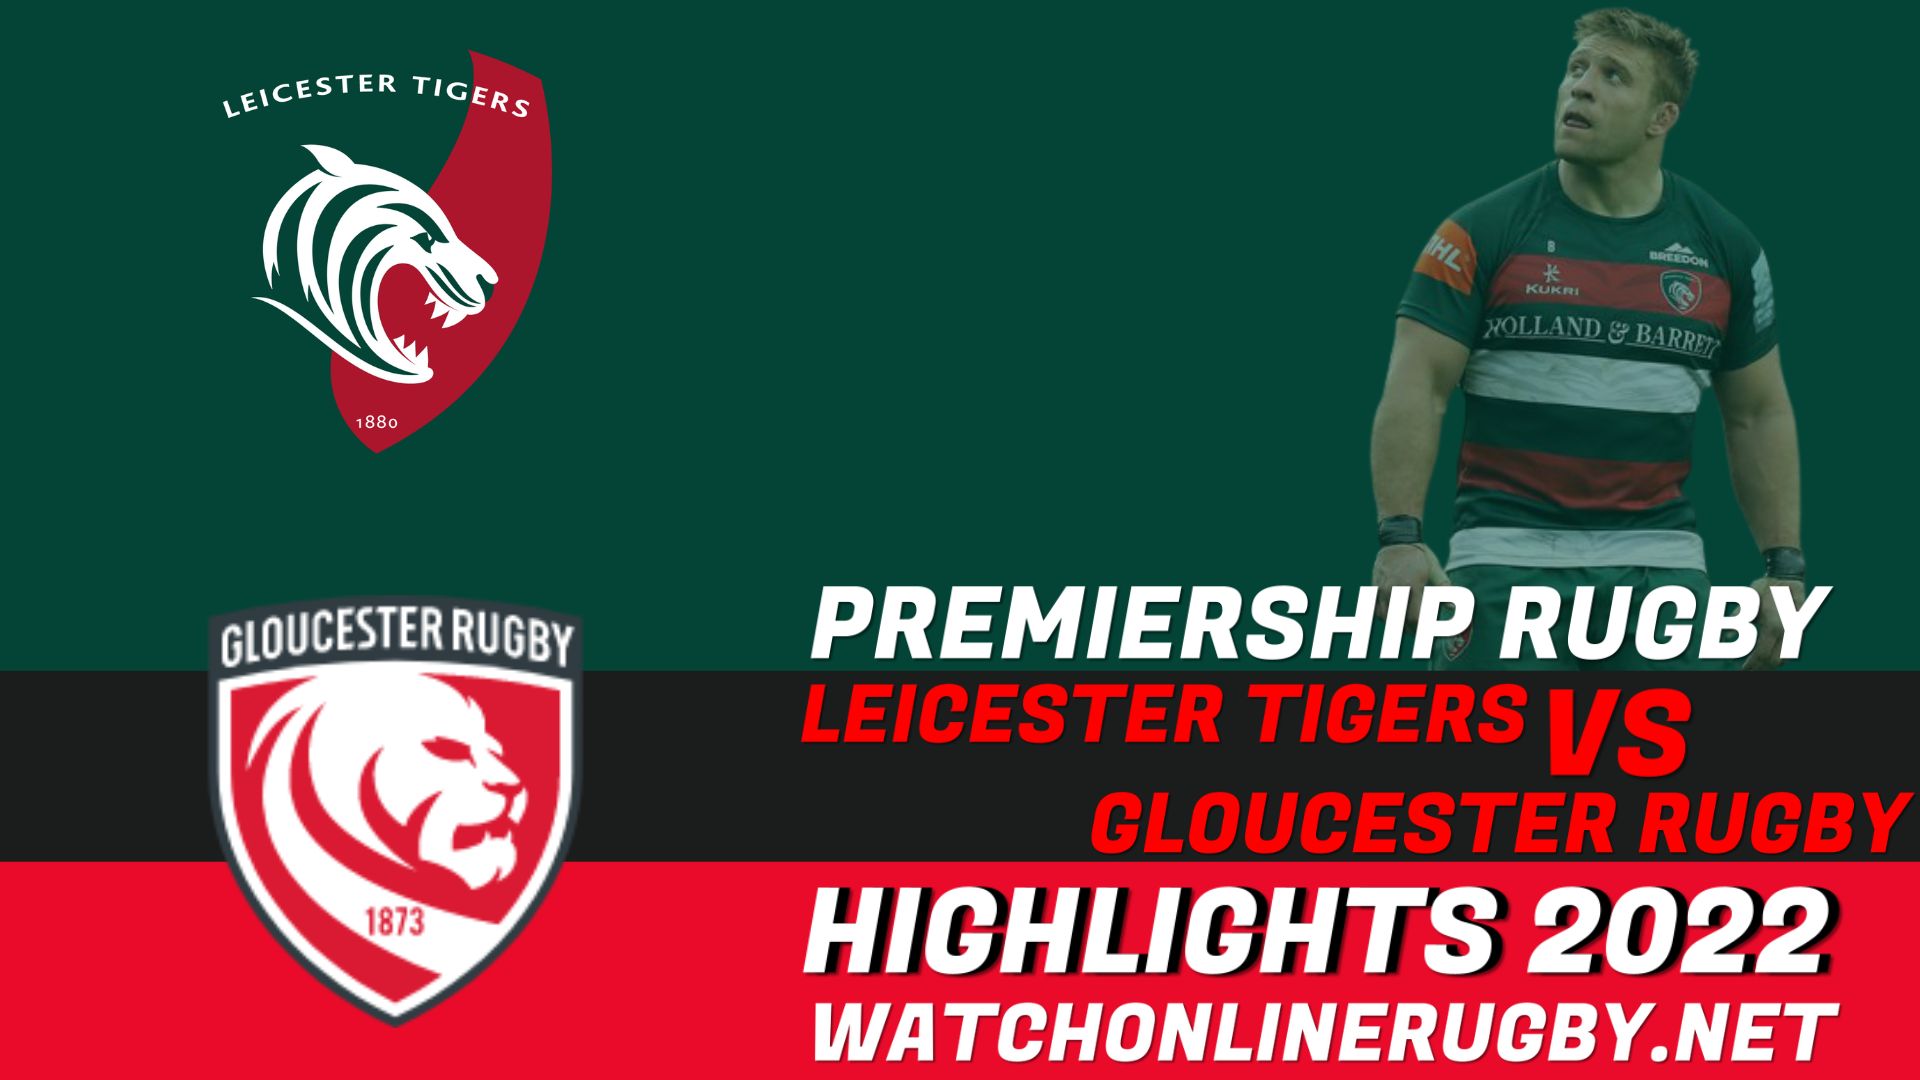 Leicester Tigers Vs Gloucester Rugby Premiership Rugby 2022 RD 18